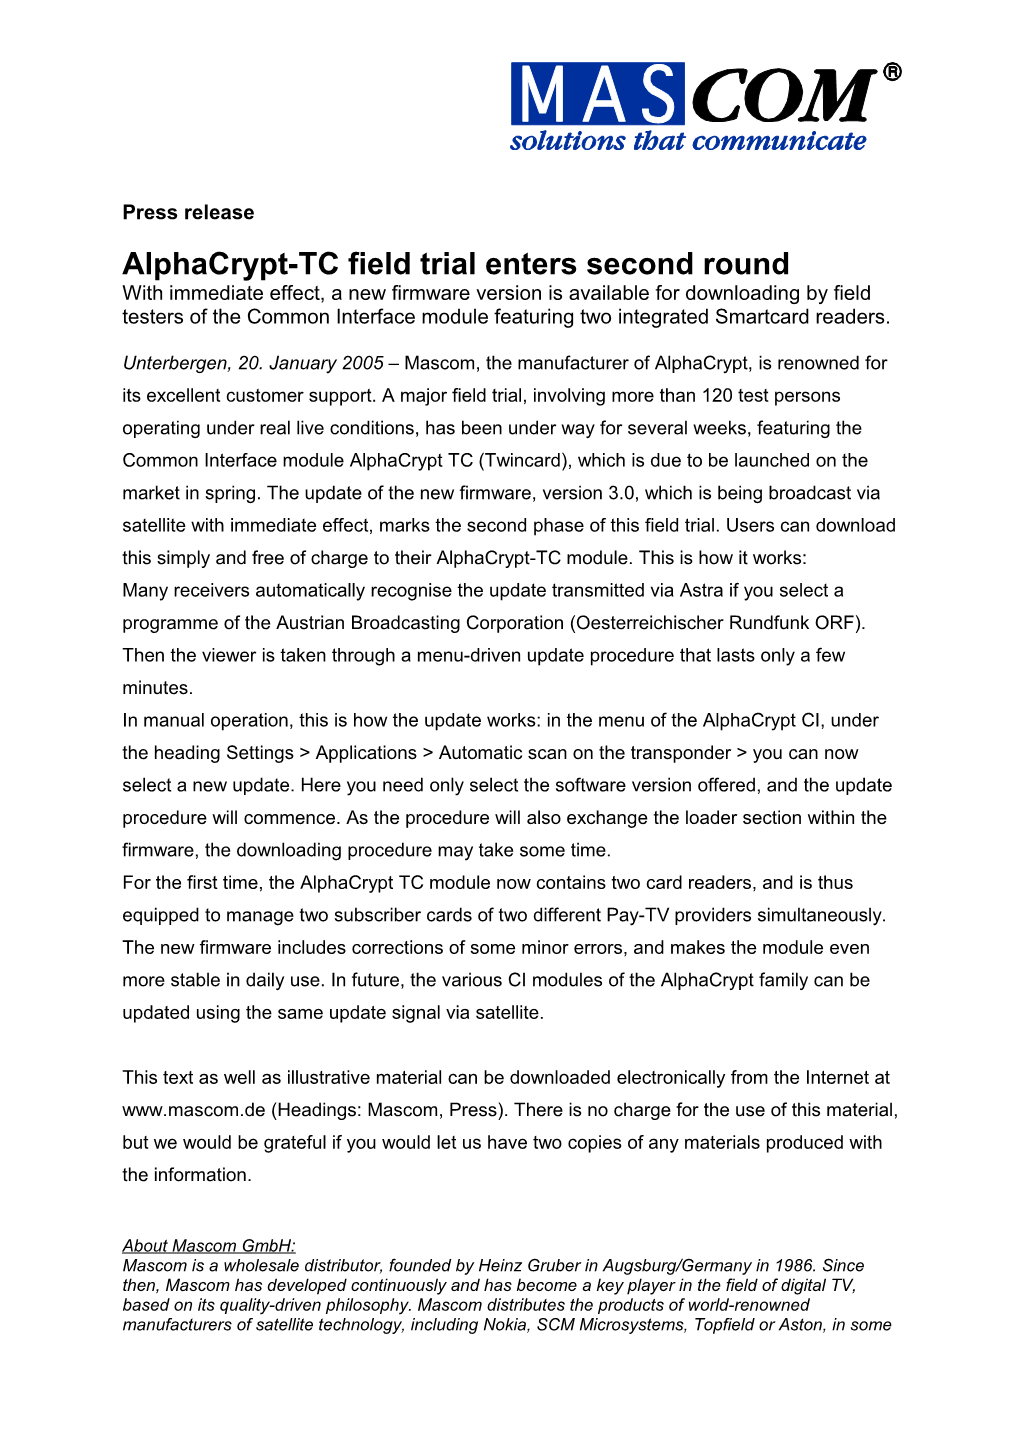 Alphacrypt-TC Field Trial Enters Second Round